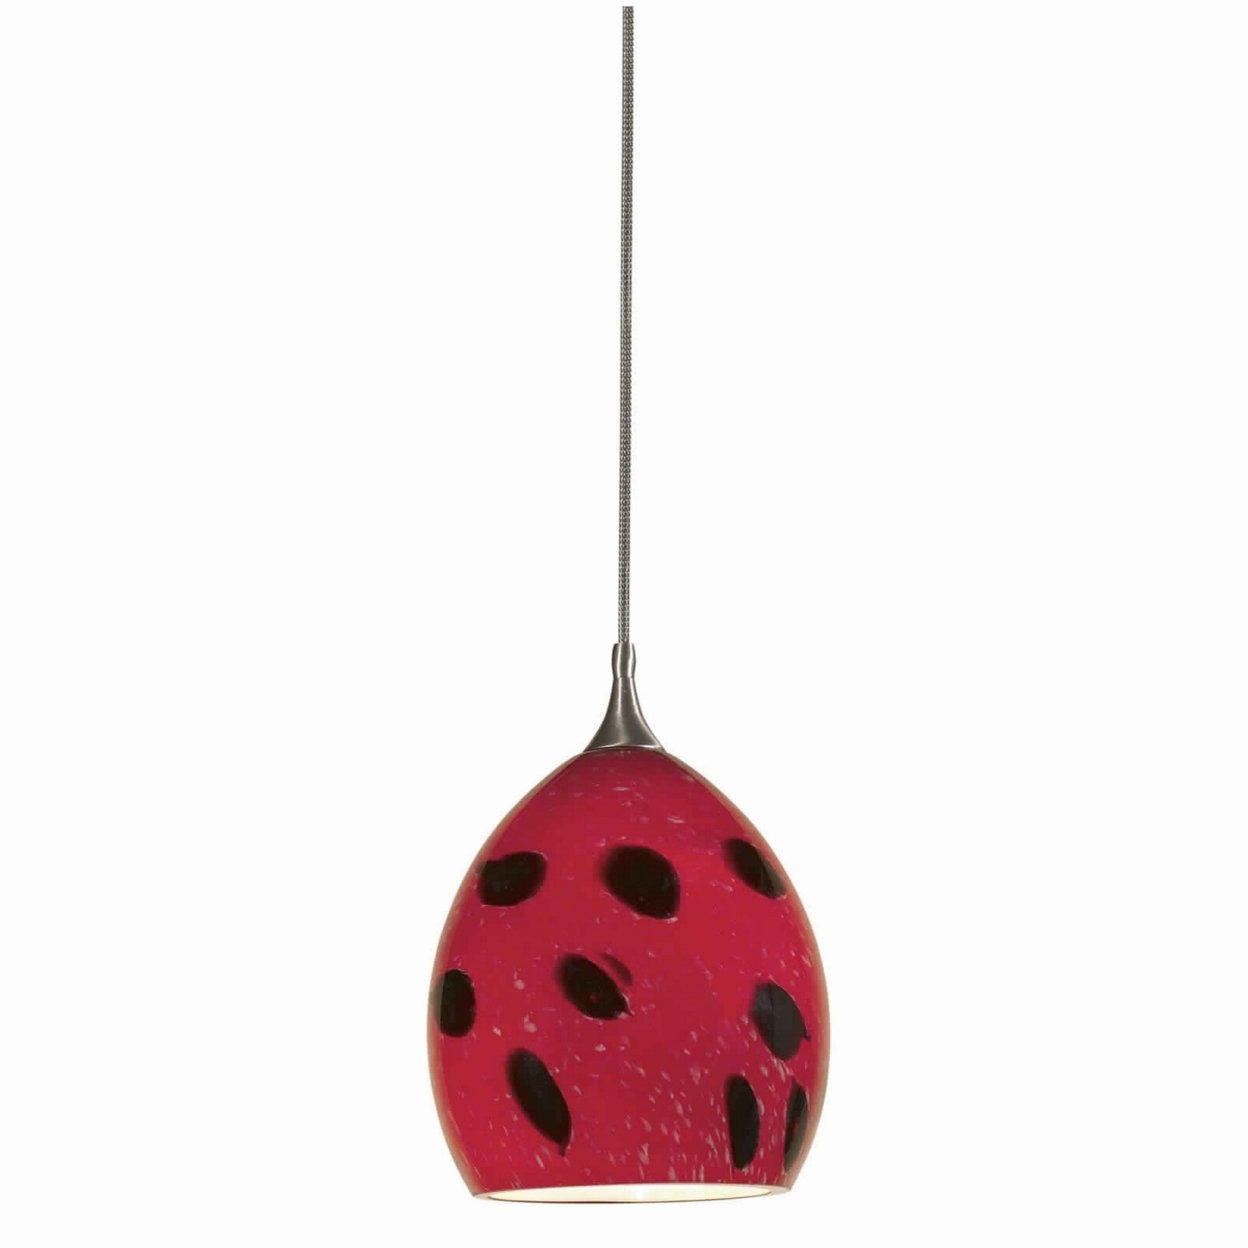 Dome Shaped Glass Shade Pendant Lighting With Cord, Red And Black- Saltoro Sherpi